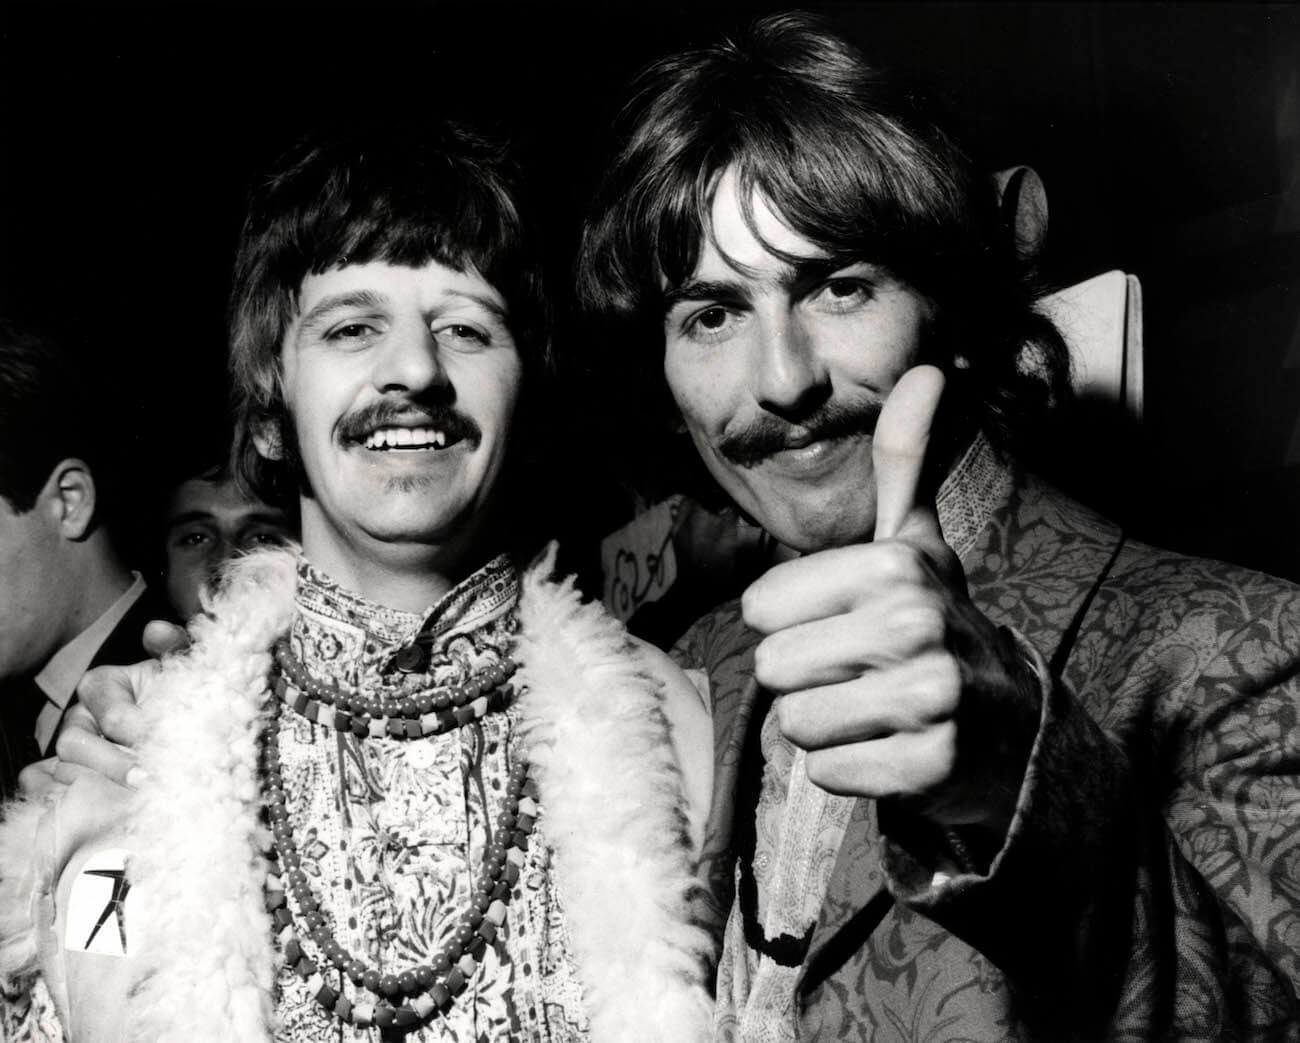 George Harrison and Ringo Starr at the 'All You Need Is Love' session in 1967.